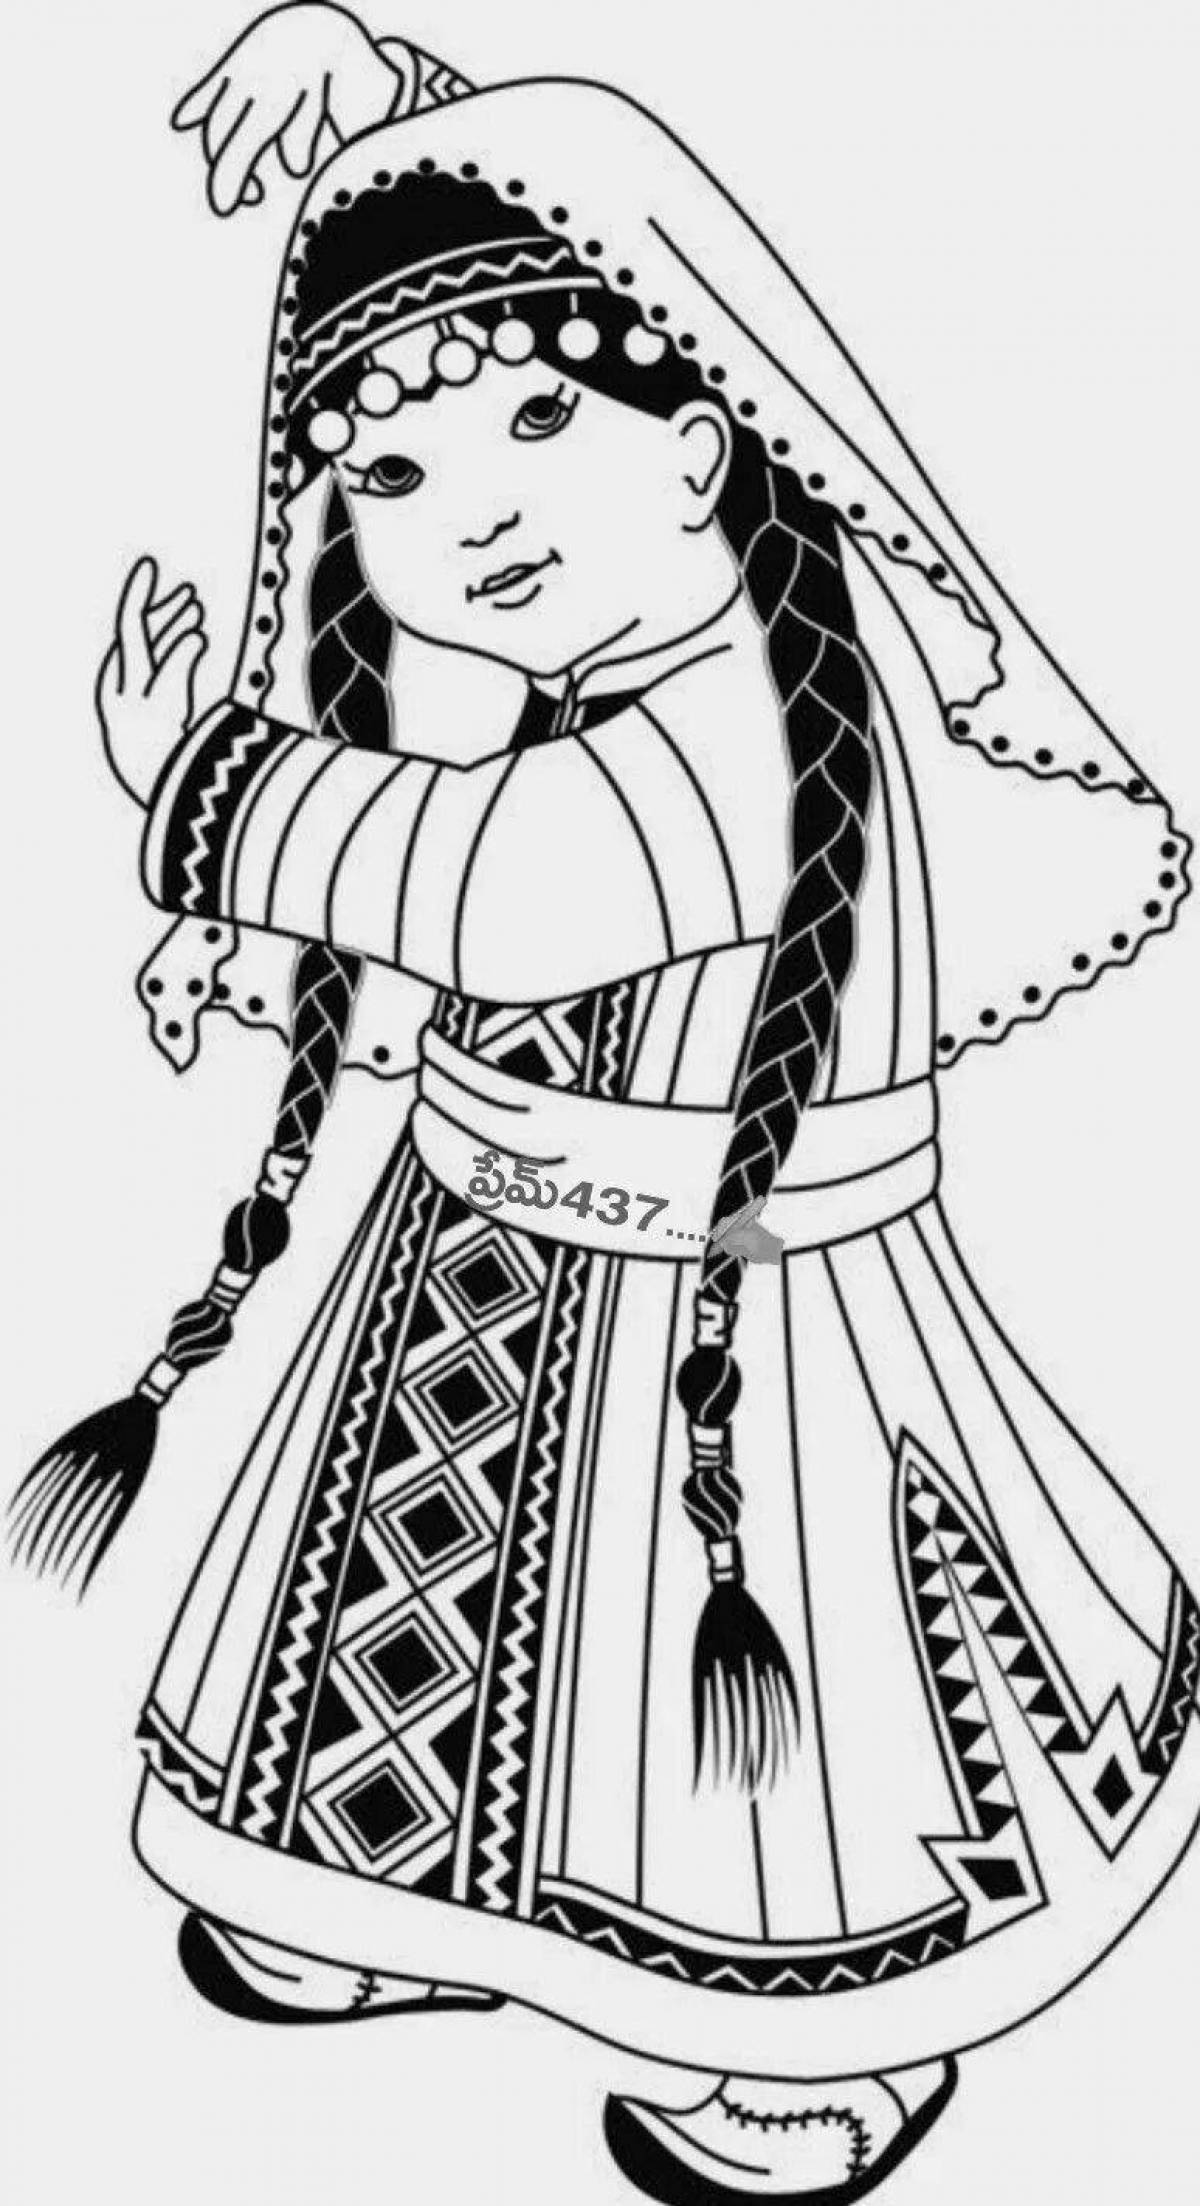 Coloring book beckoning Yakuts in national costume